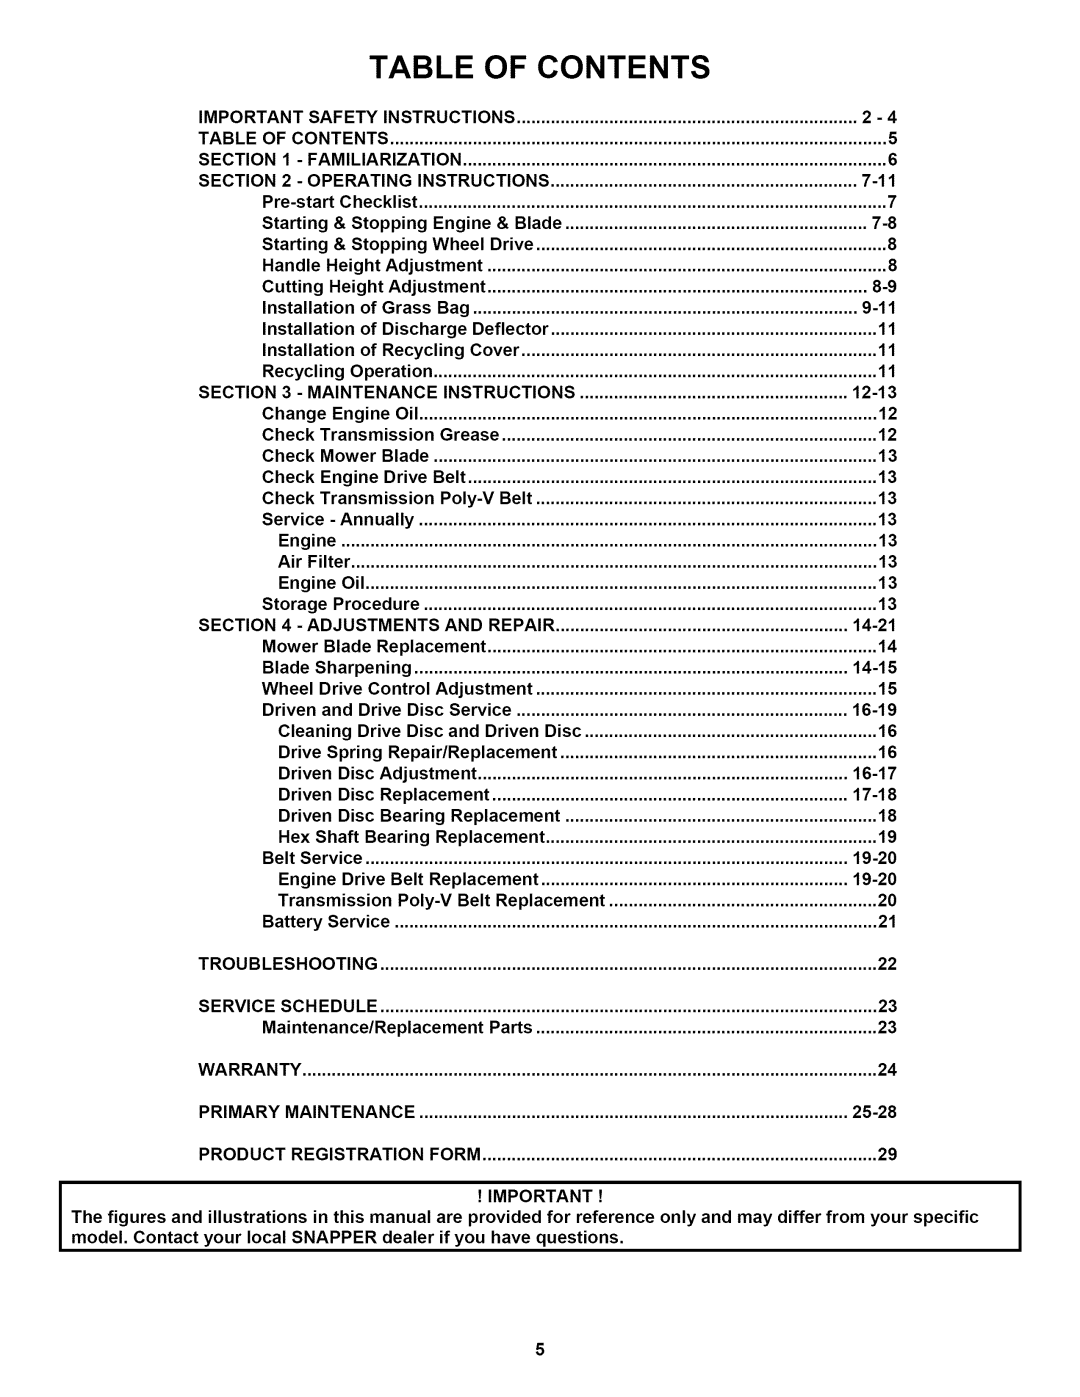 Snapper P216518B important safety instructions Table Of Contents 